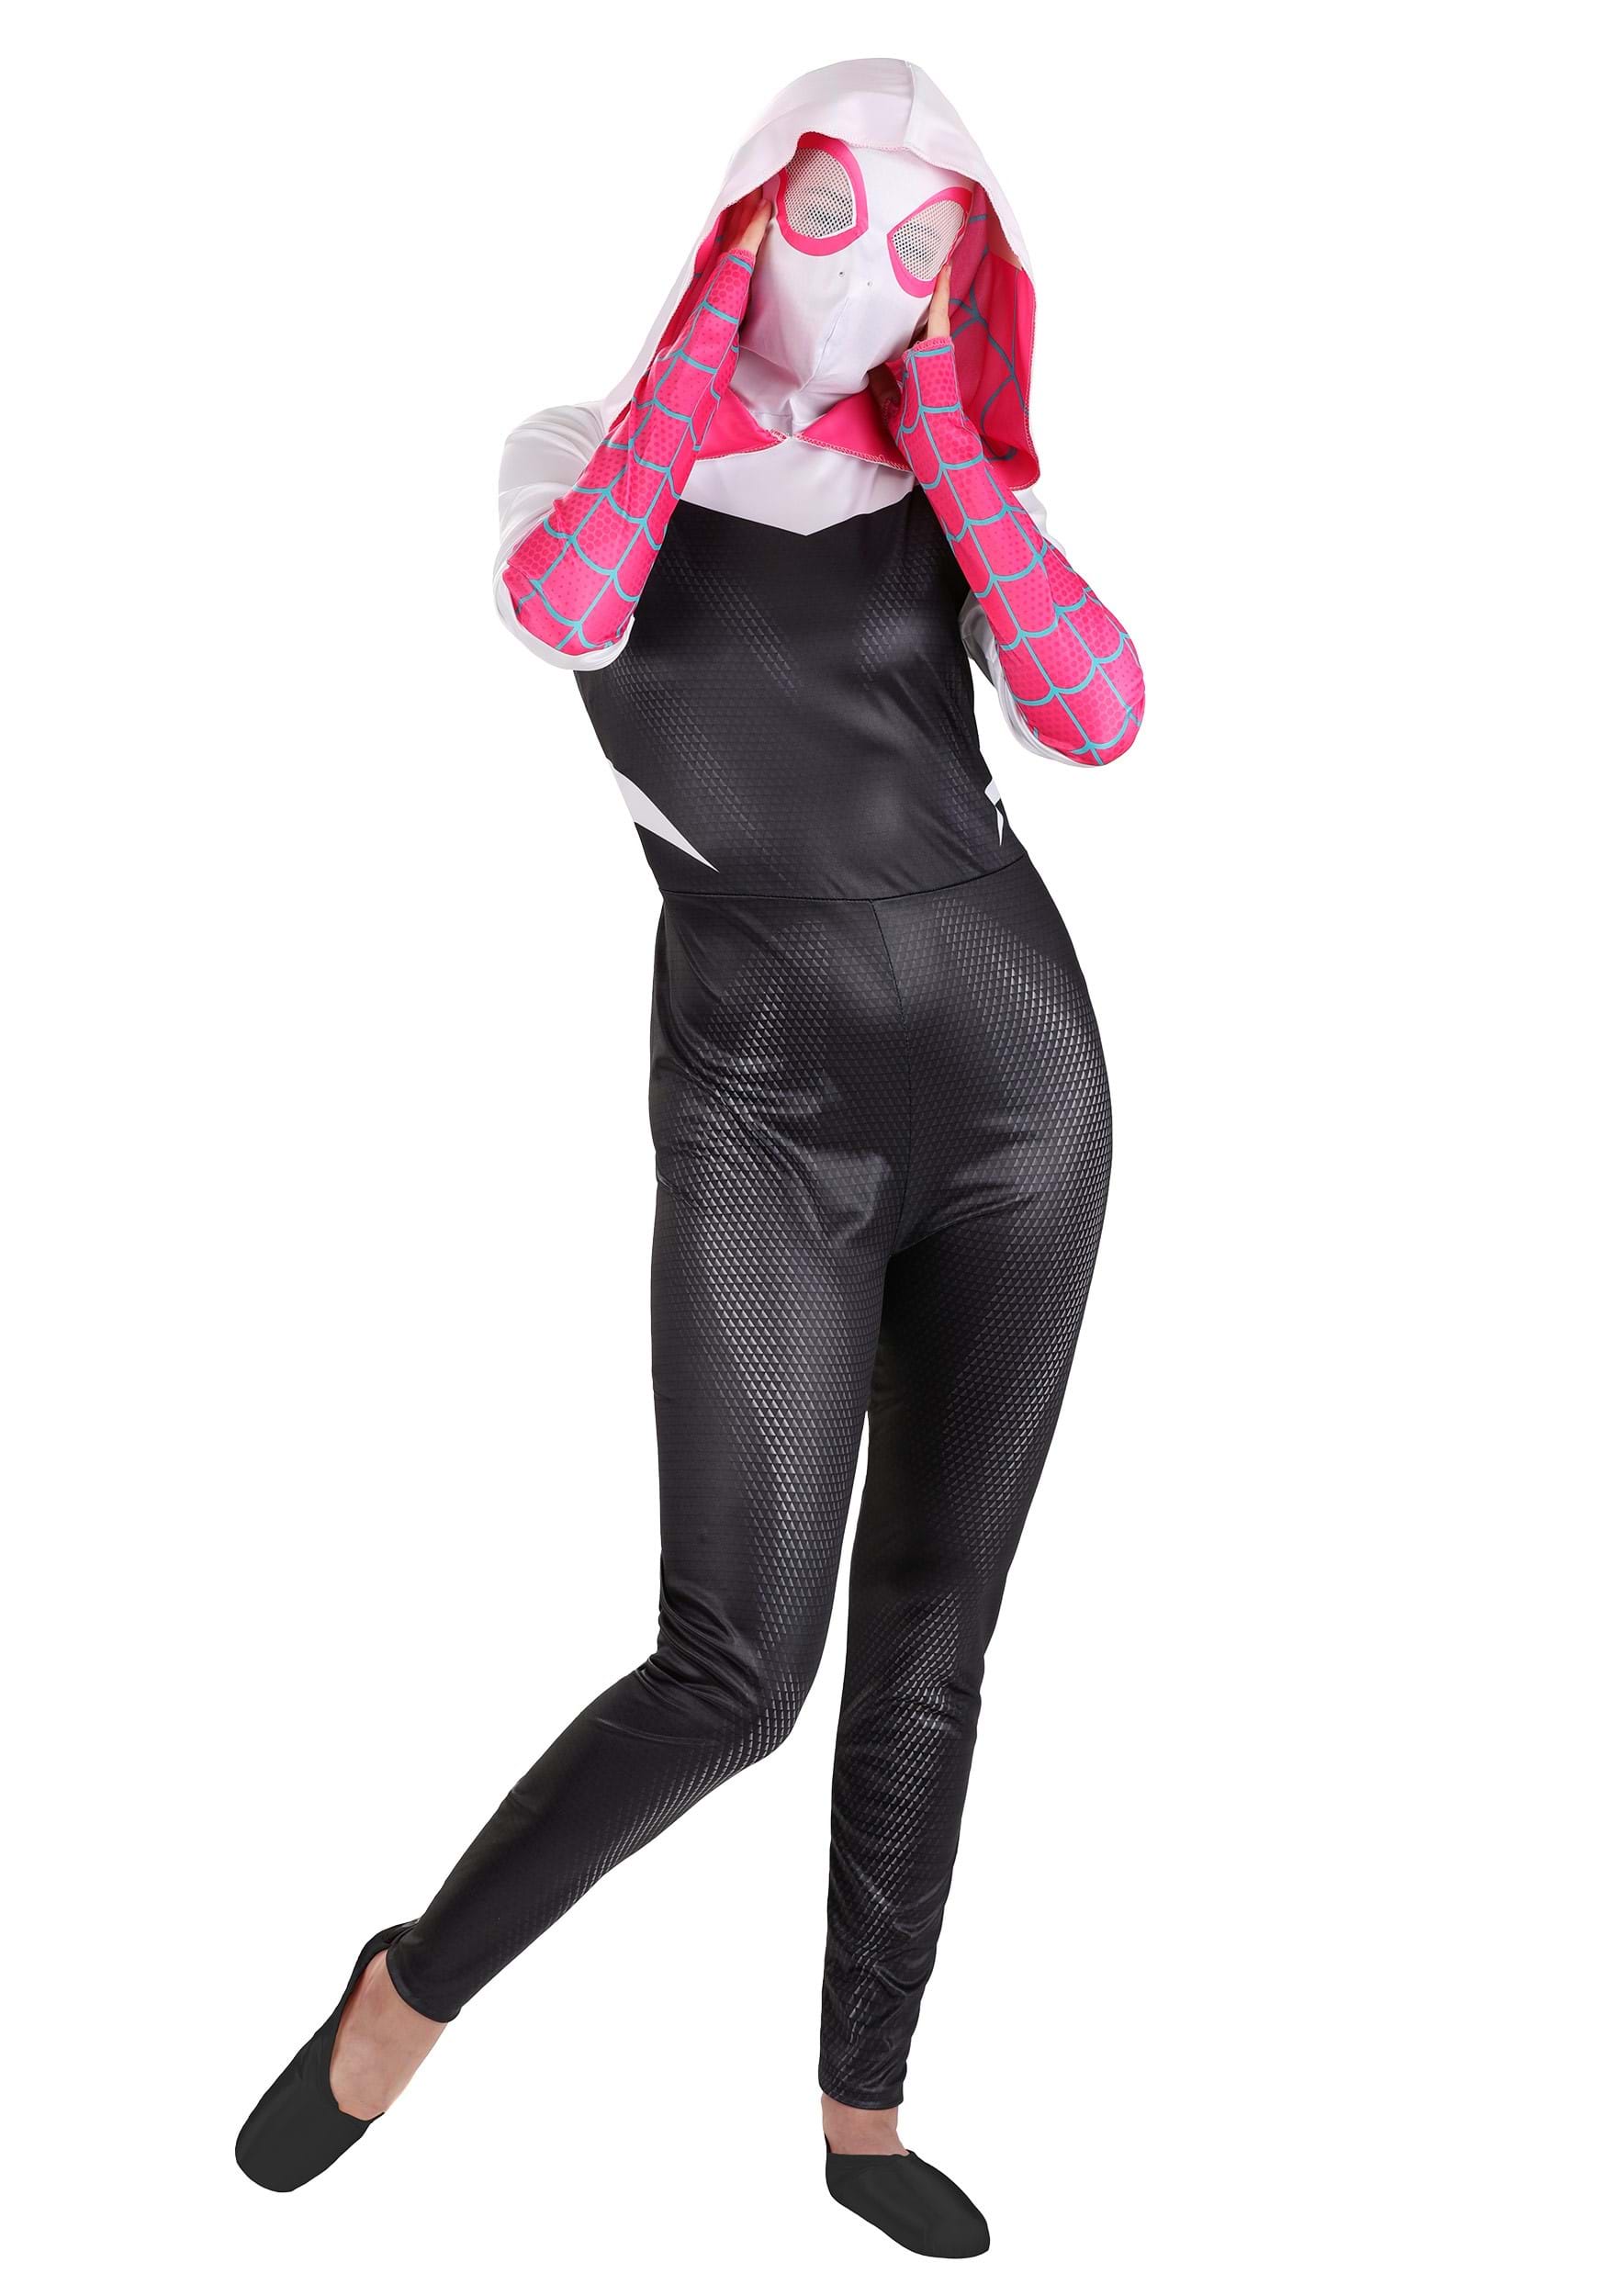 Photos - Fancy Dress Jazwares Spider-Gwen Costume for Adults Black/Pink/White JWC1085 